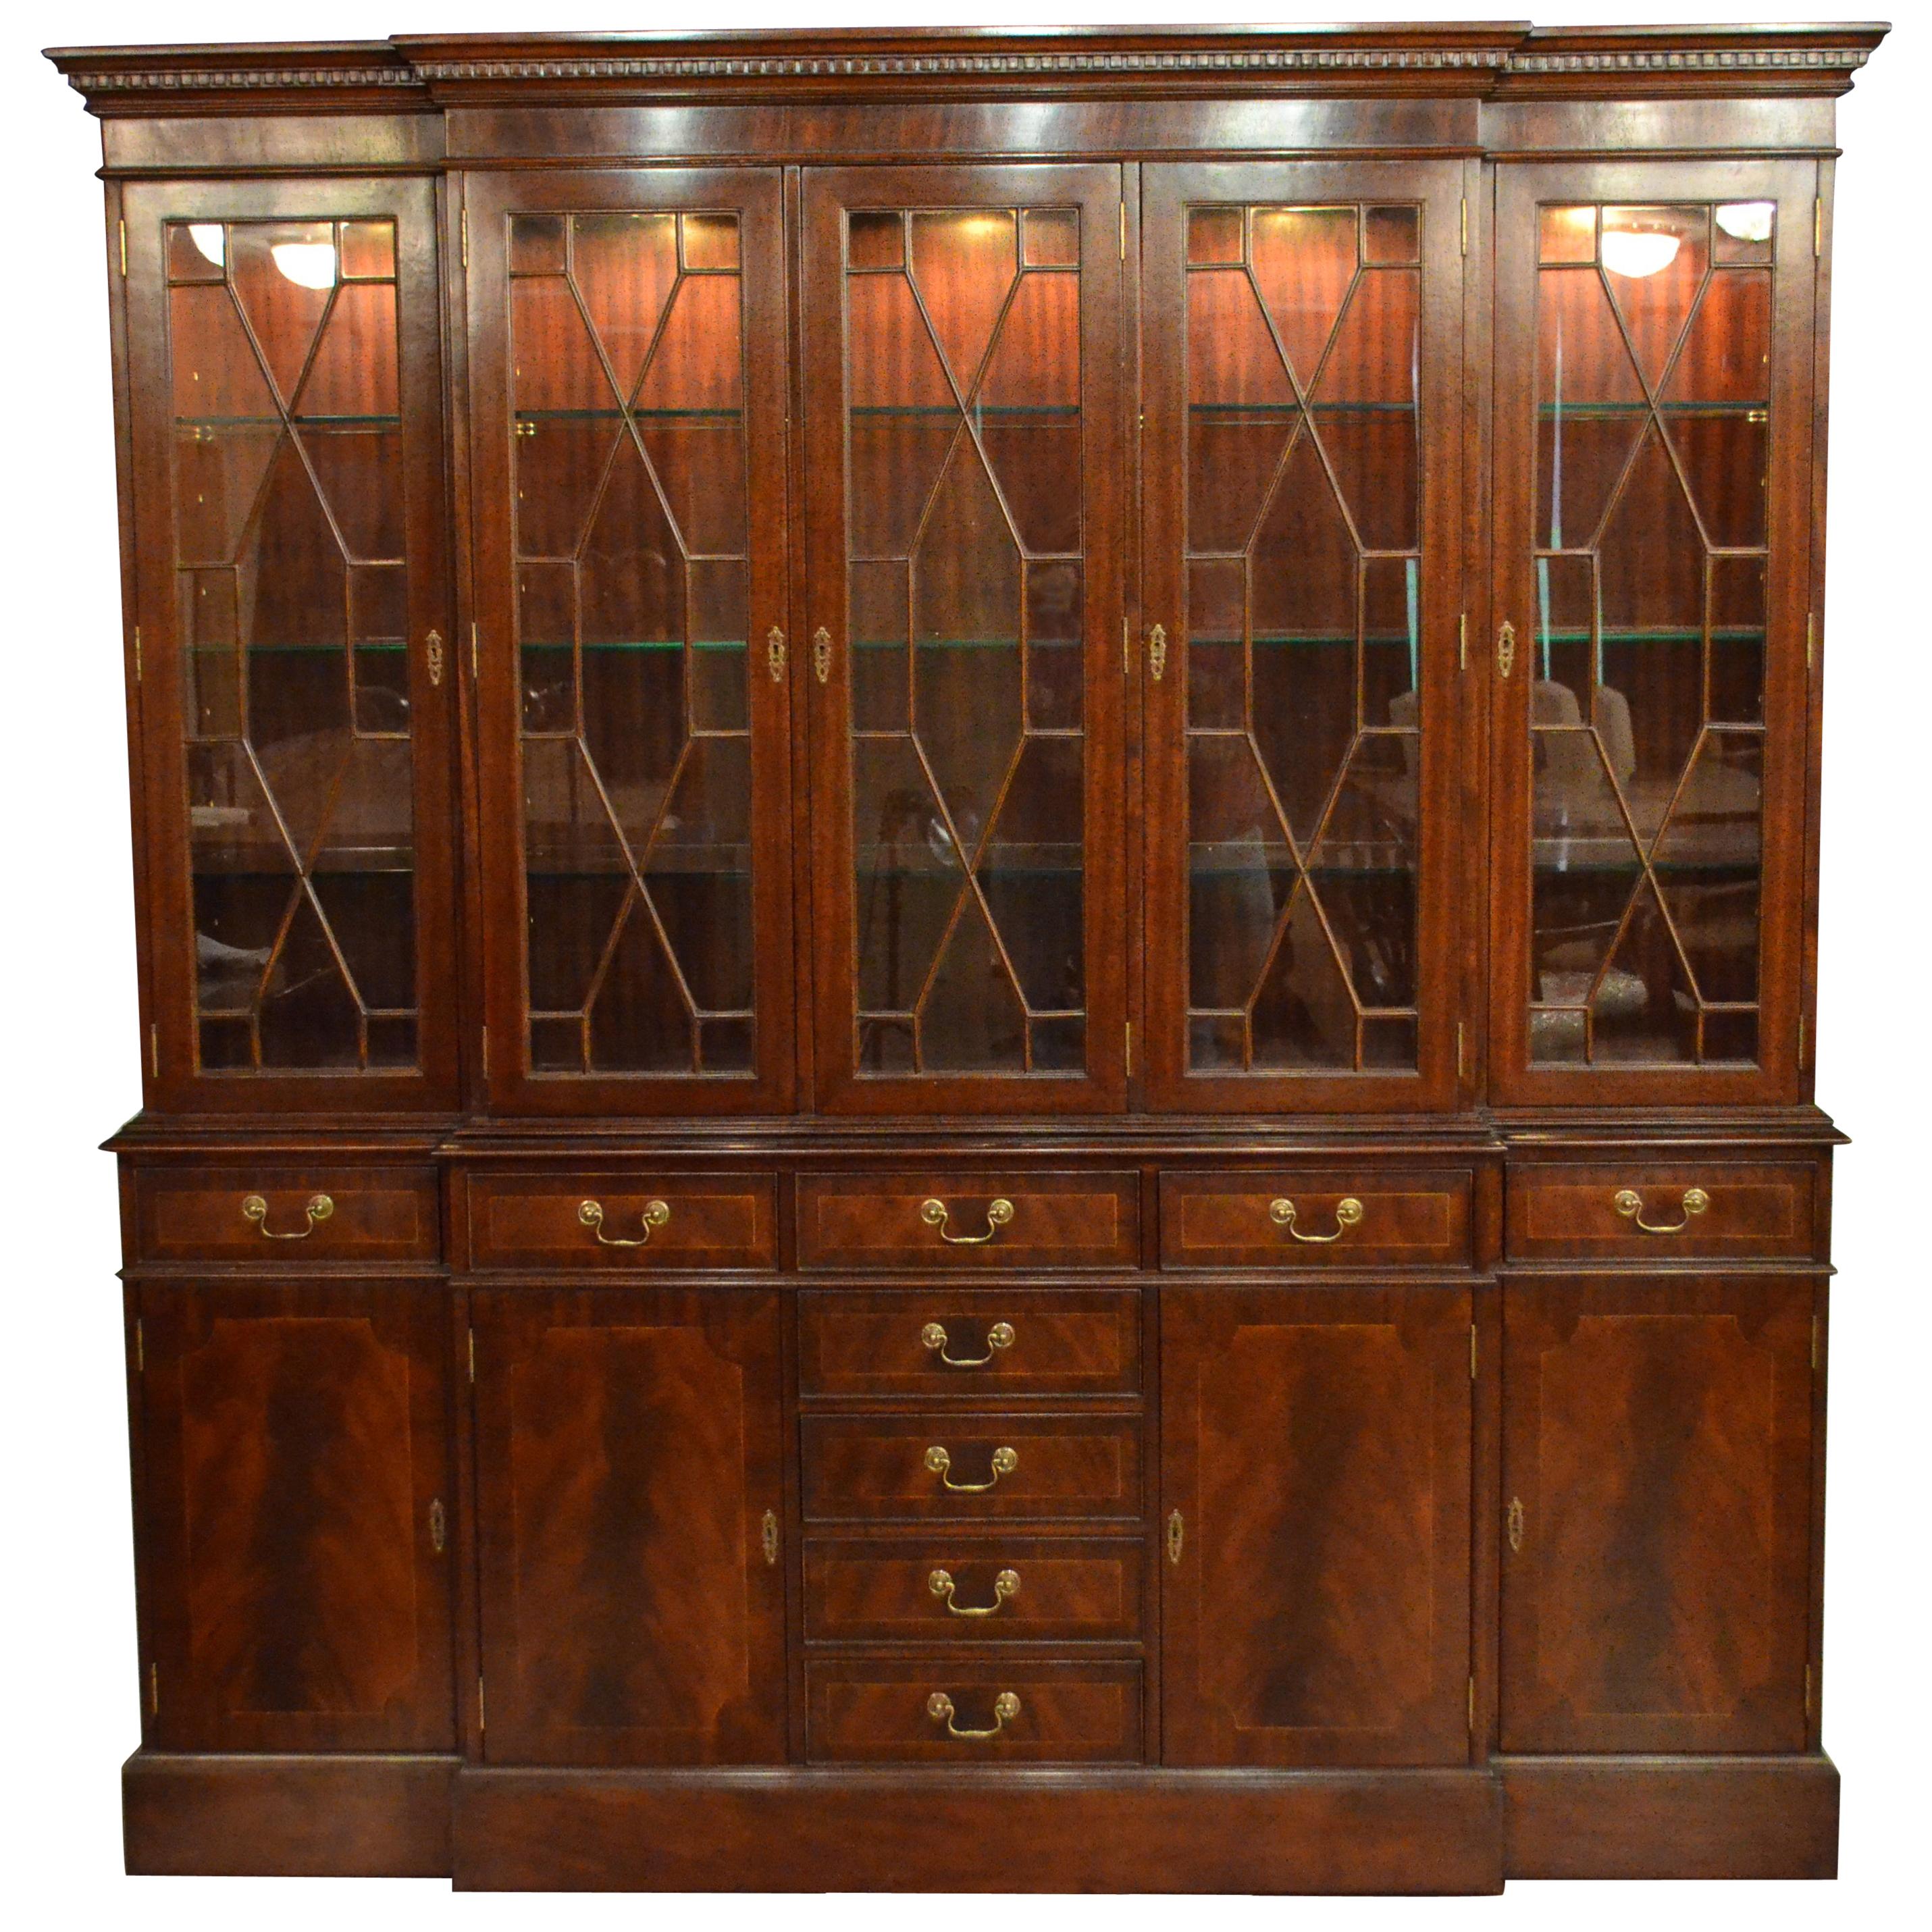 Large Mahogany Georgian Style Five Door Bookcase China Cabinet by Leighton Hall